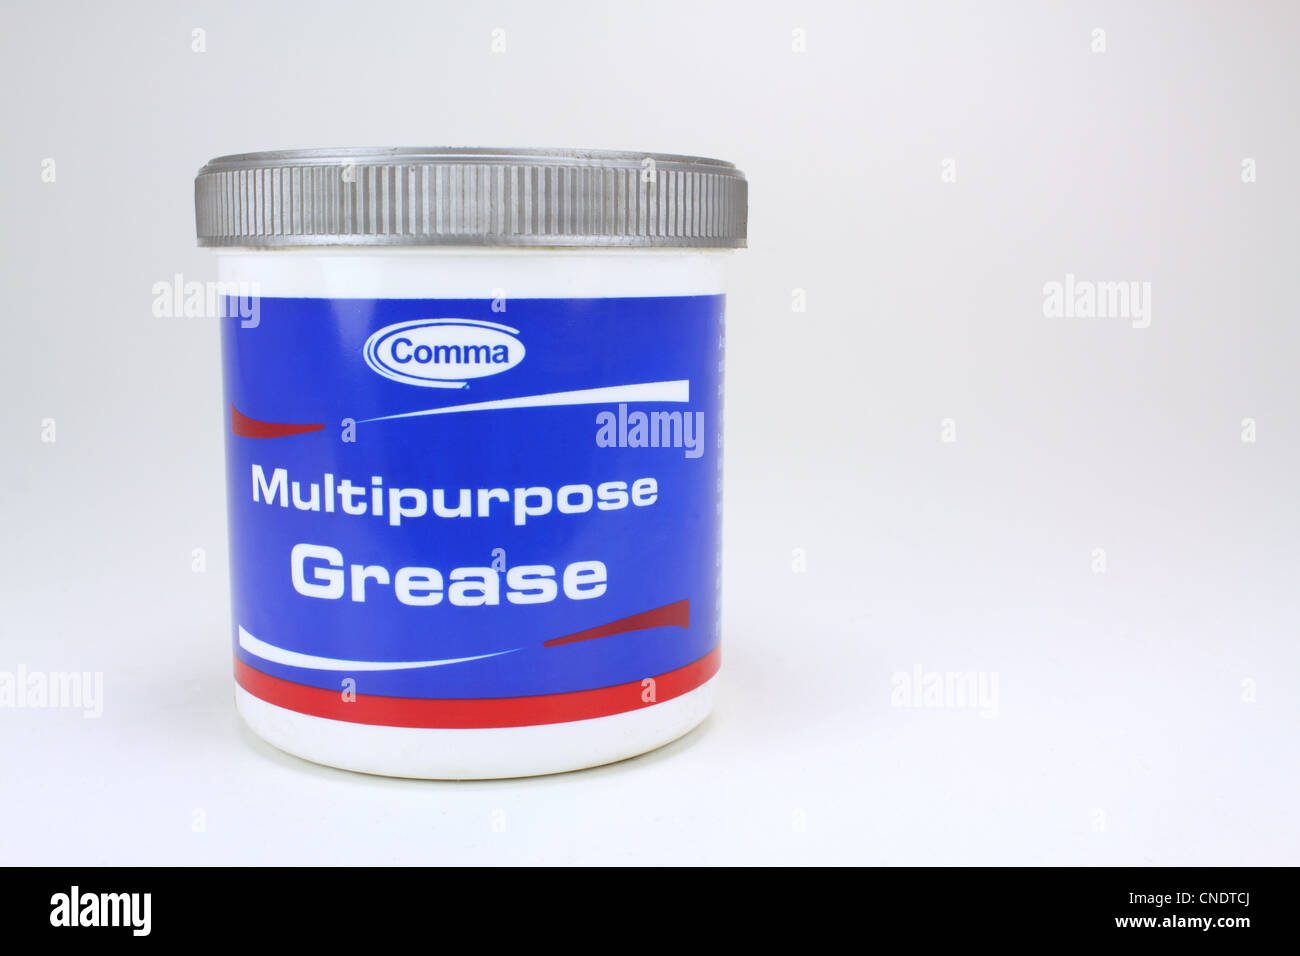 Comma Grease on white background Stock Photo